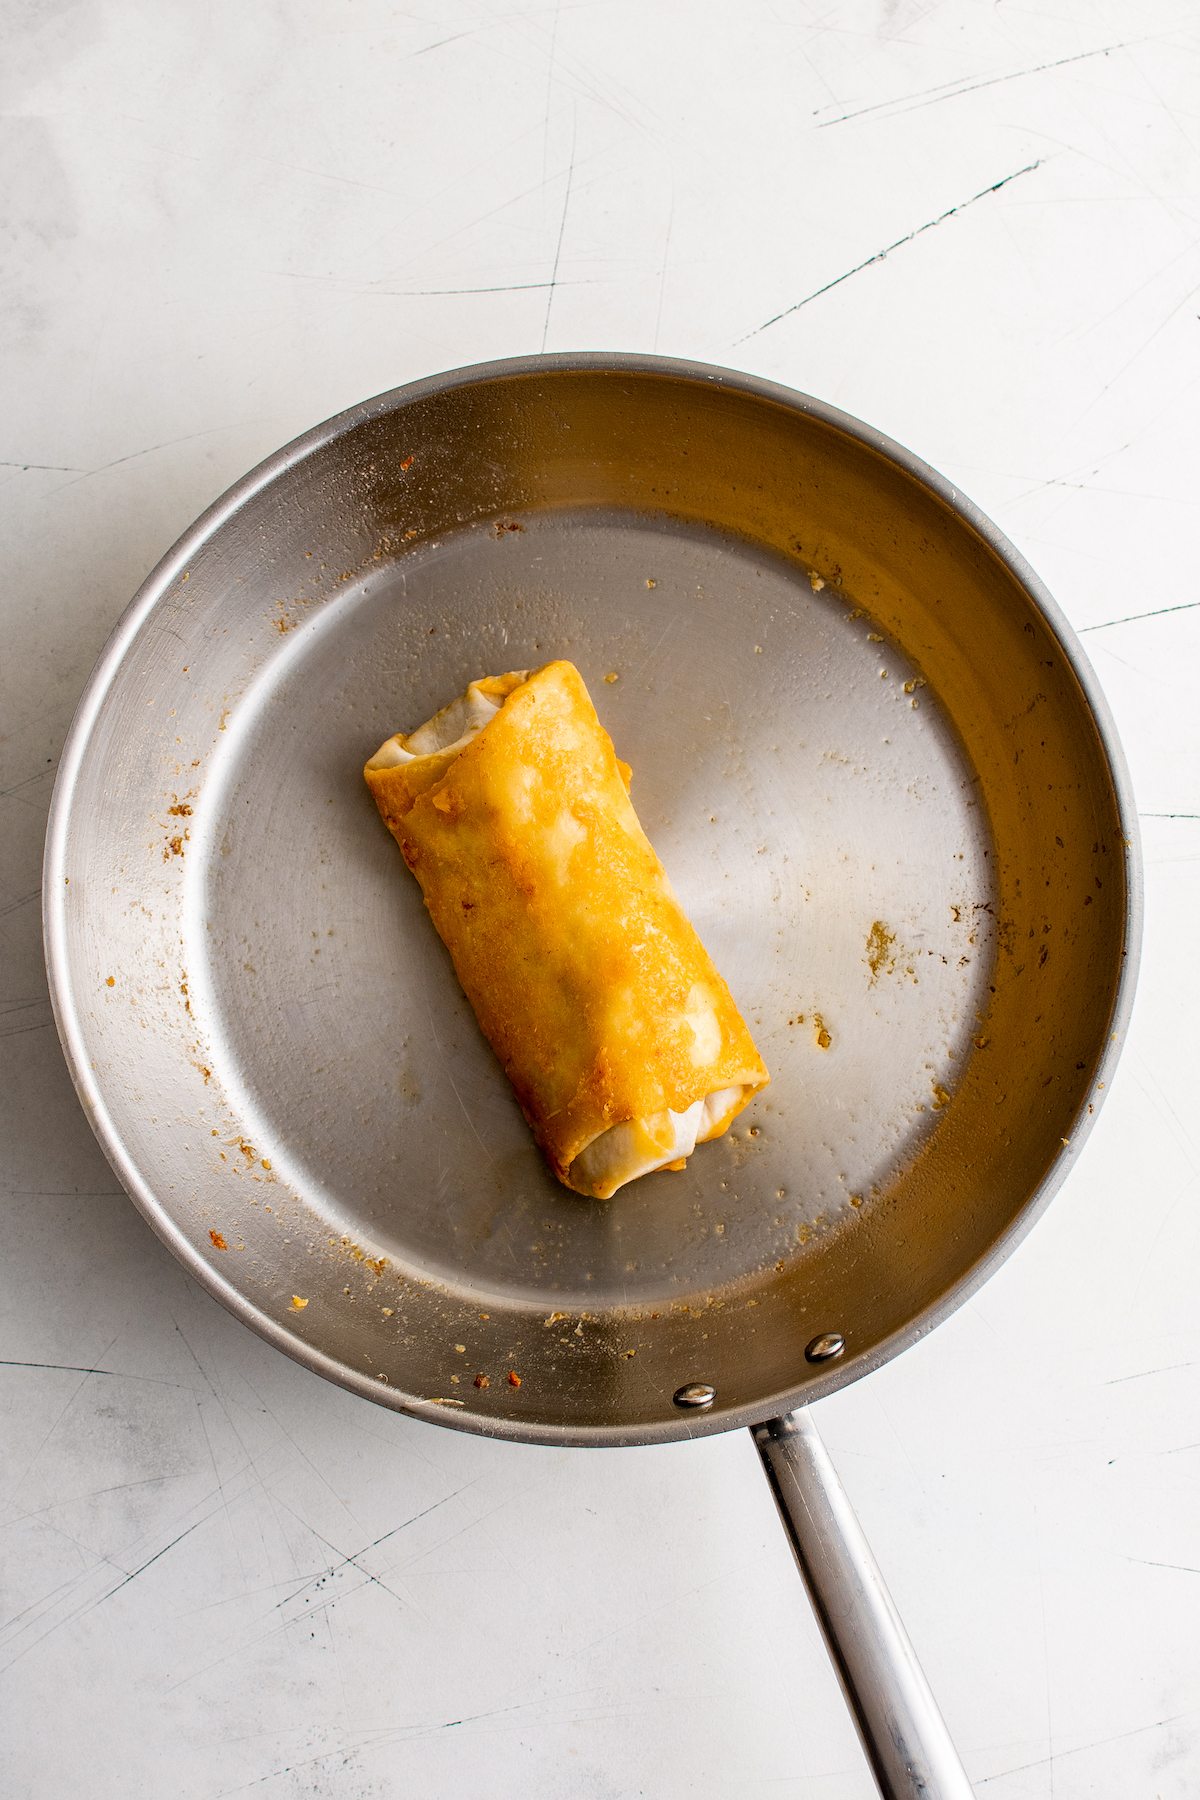 A burrito rolled up in melted cheese in a skillet.